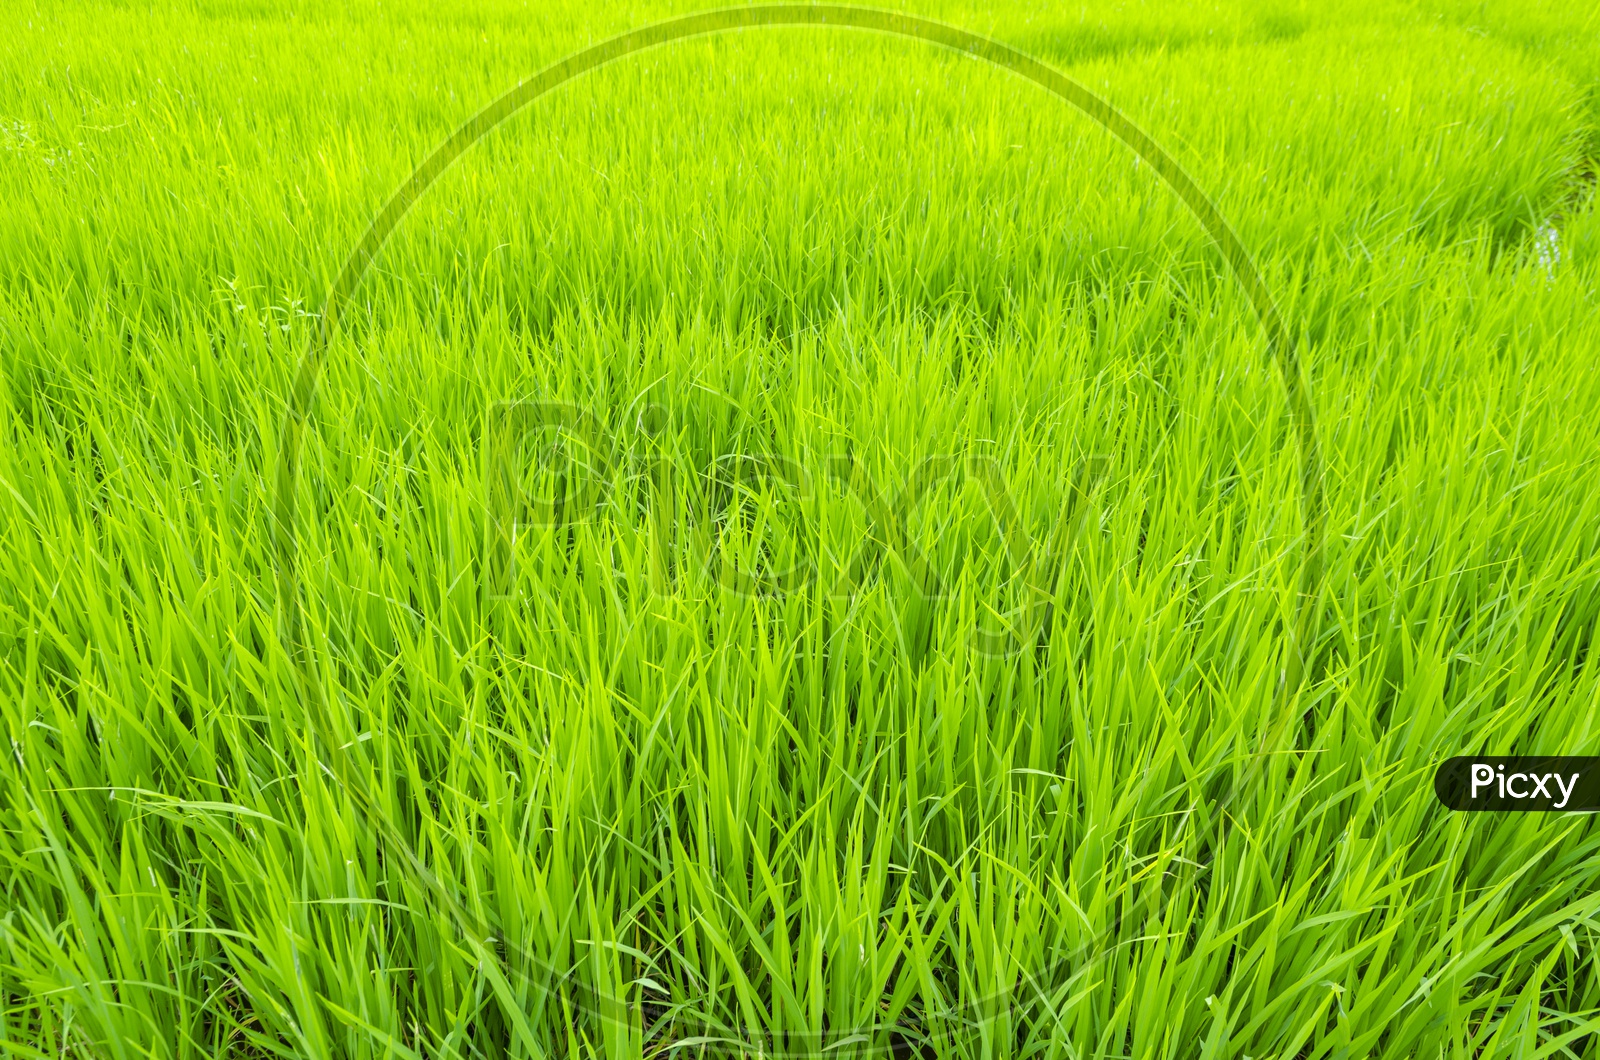 Green paddy rice field, Thailand